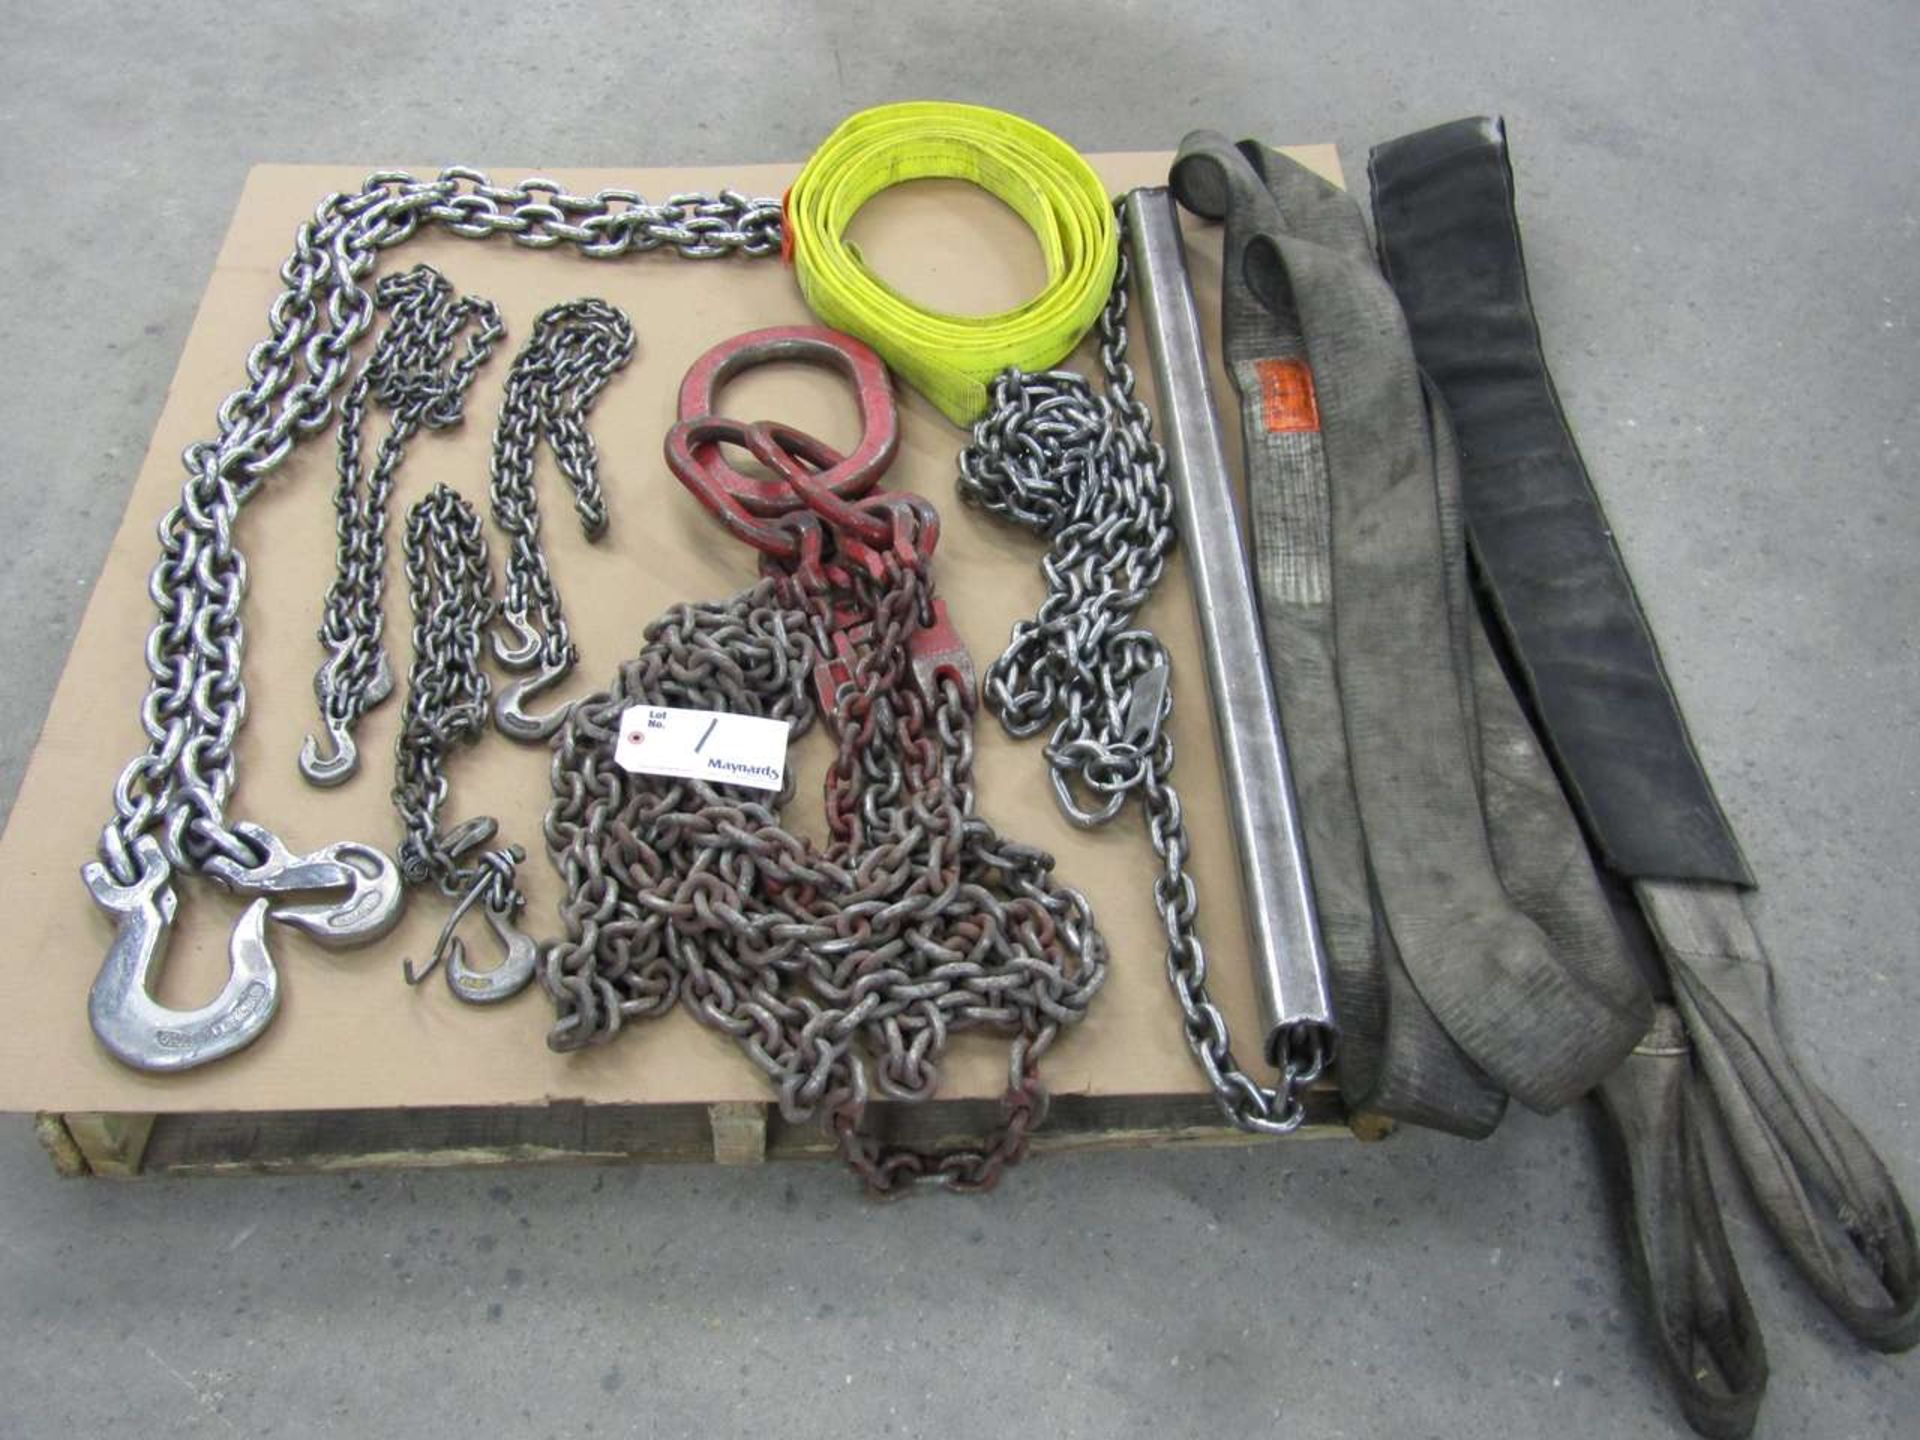 Assortment of Crane chains with Hooks. Straps